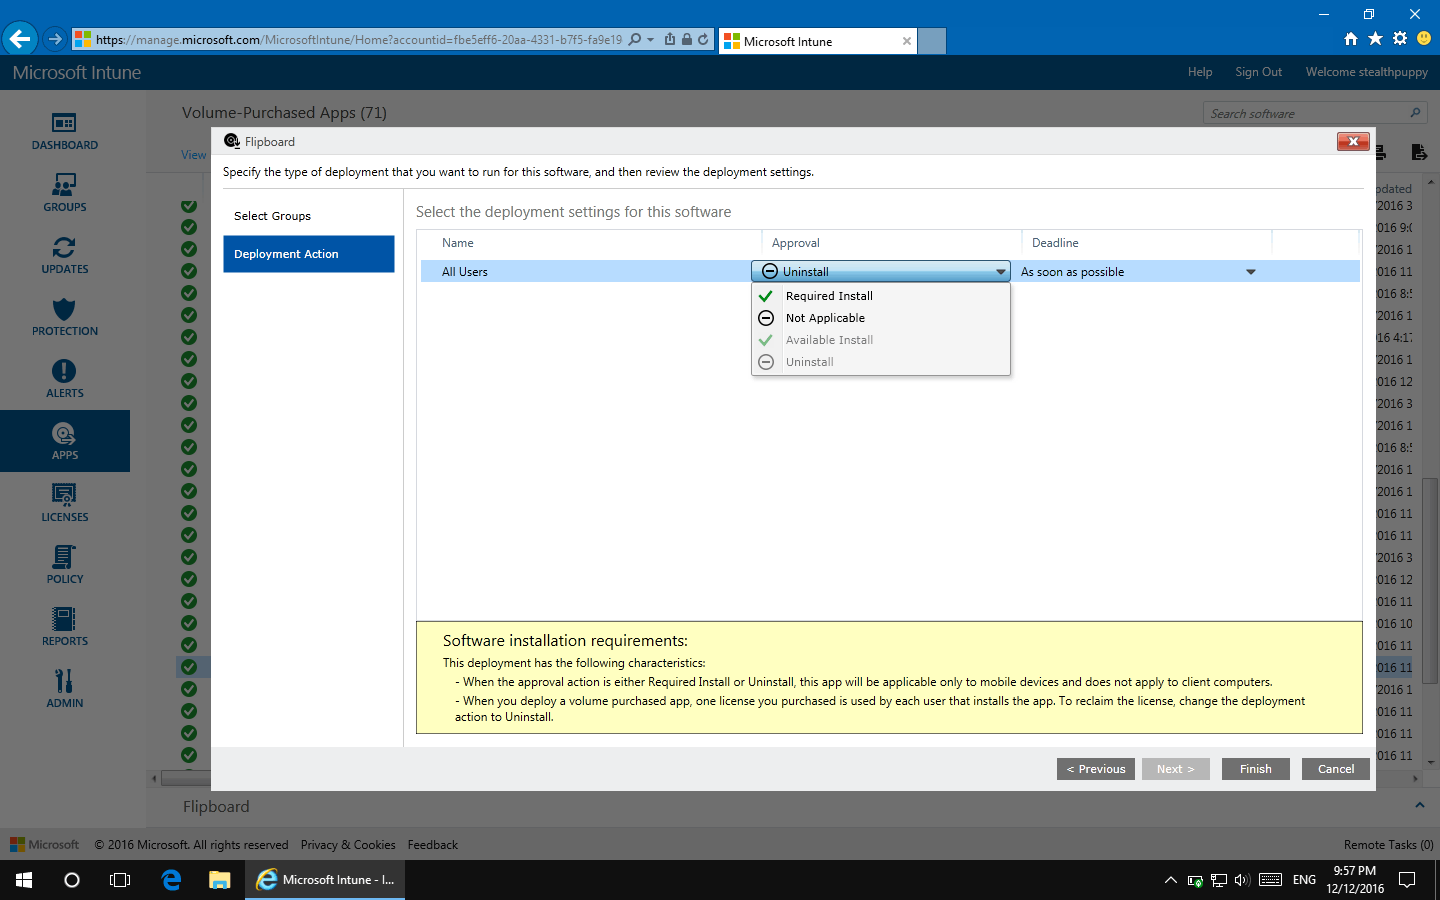 Setting deployment options on the application